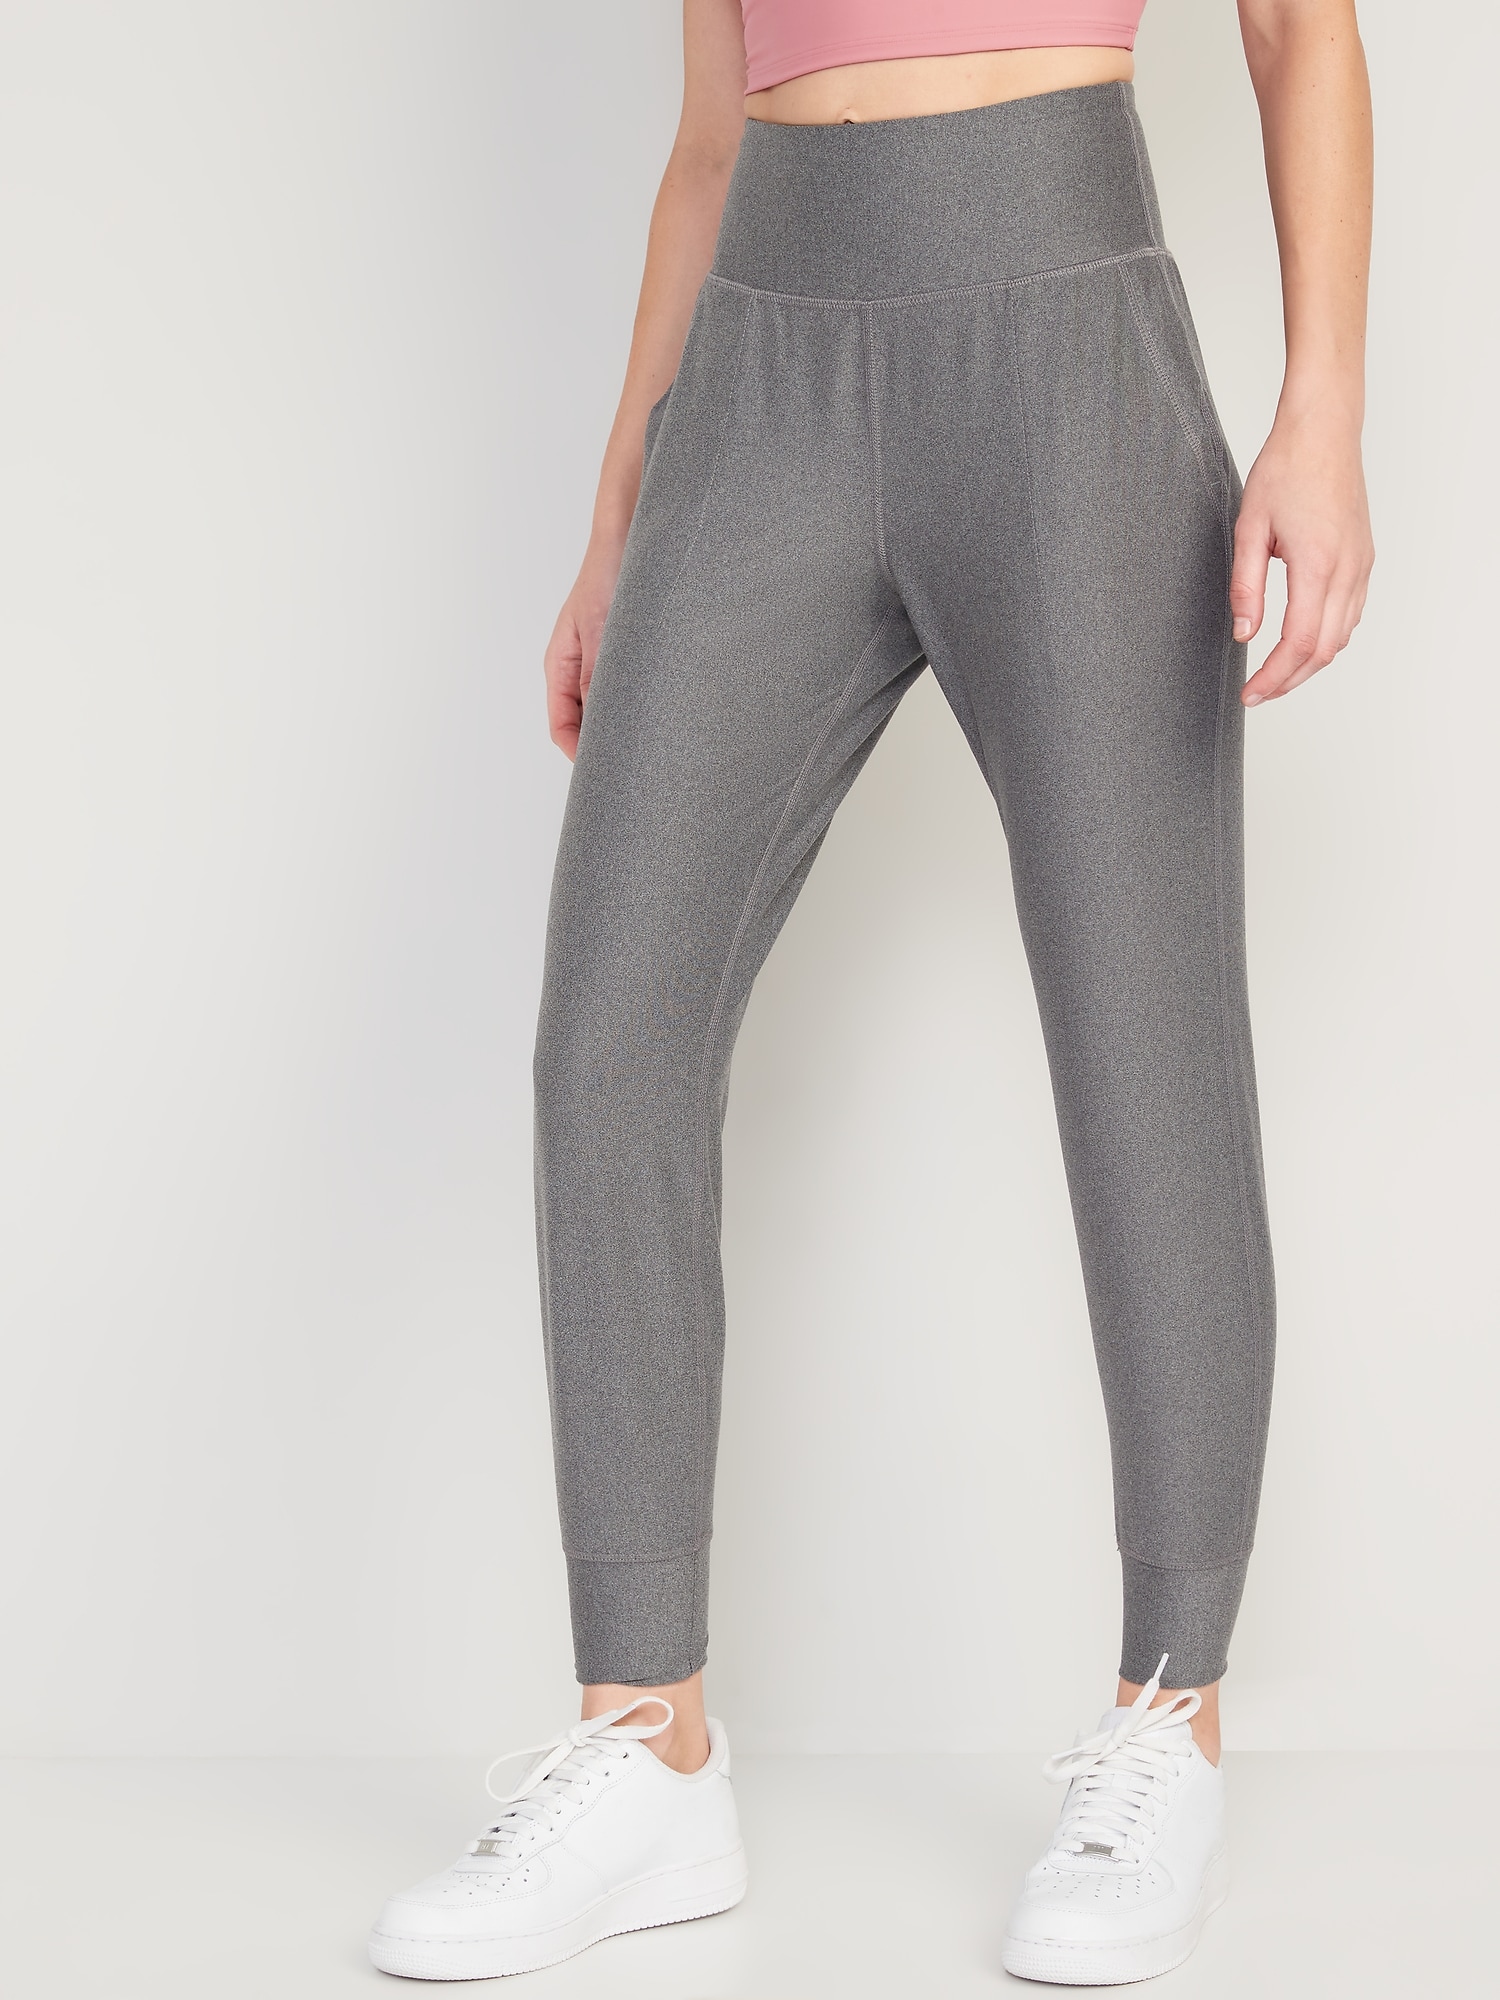 Old Navy MidRise WideLeg Satin Track Pants for Women  Southcentre Mall